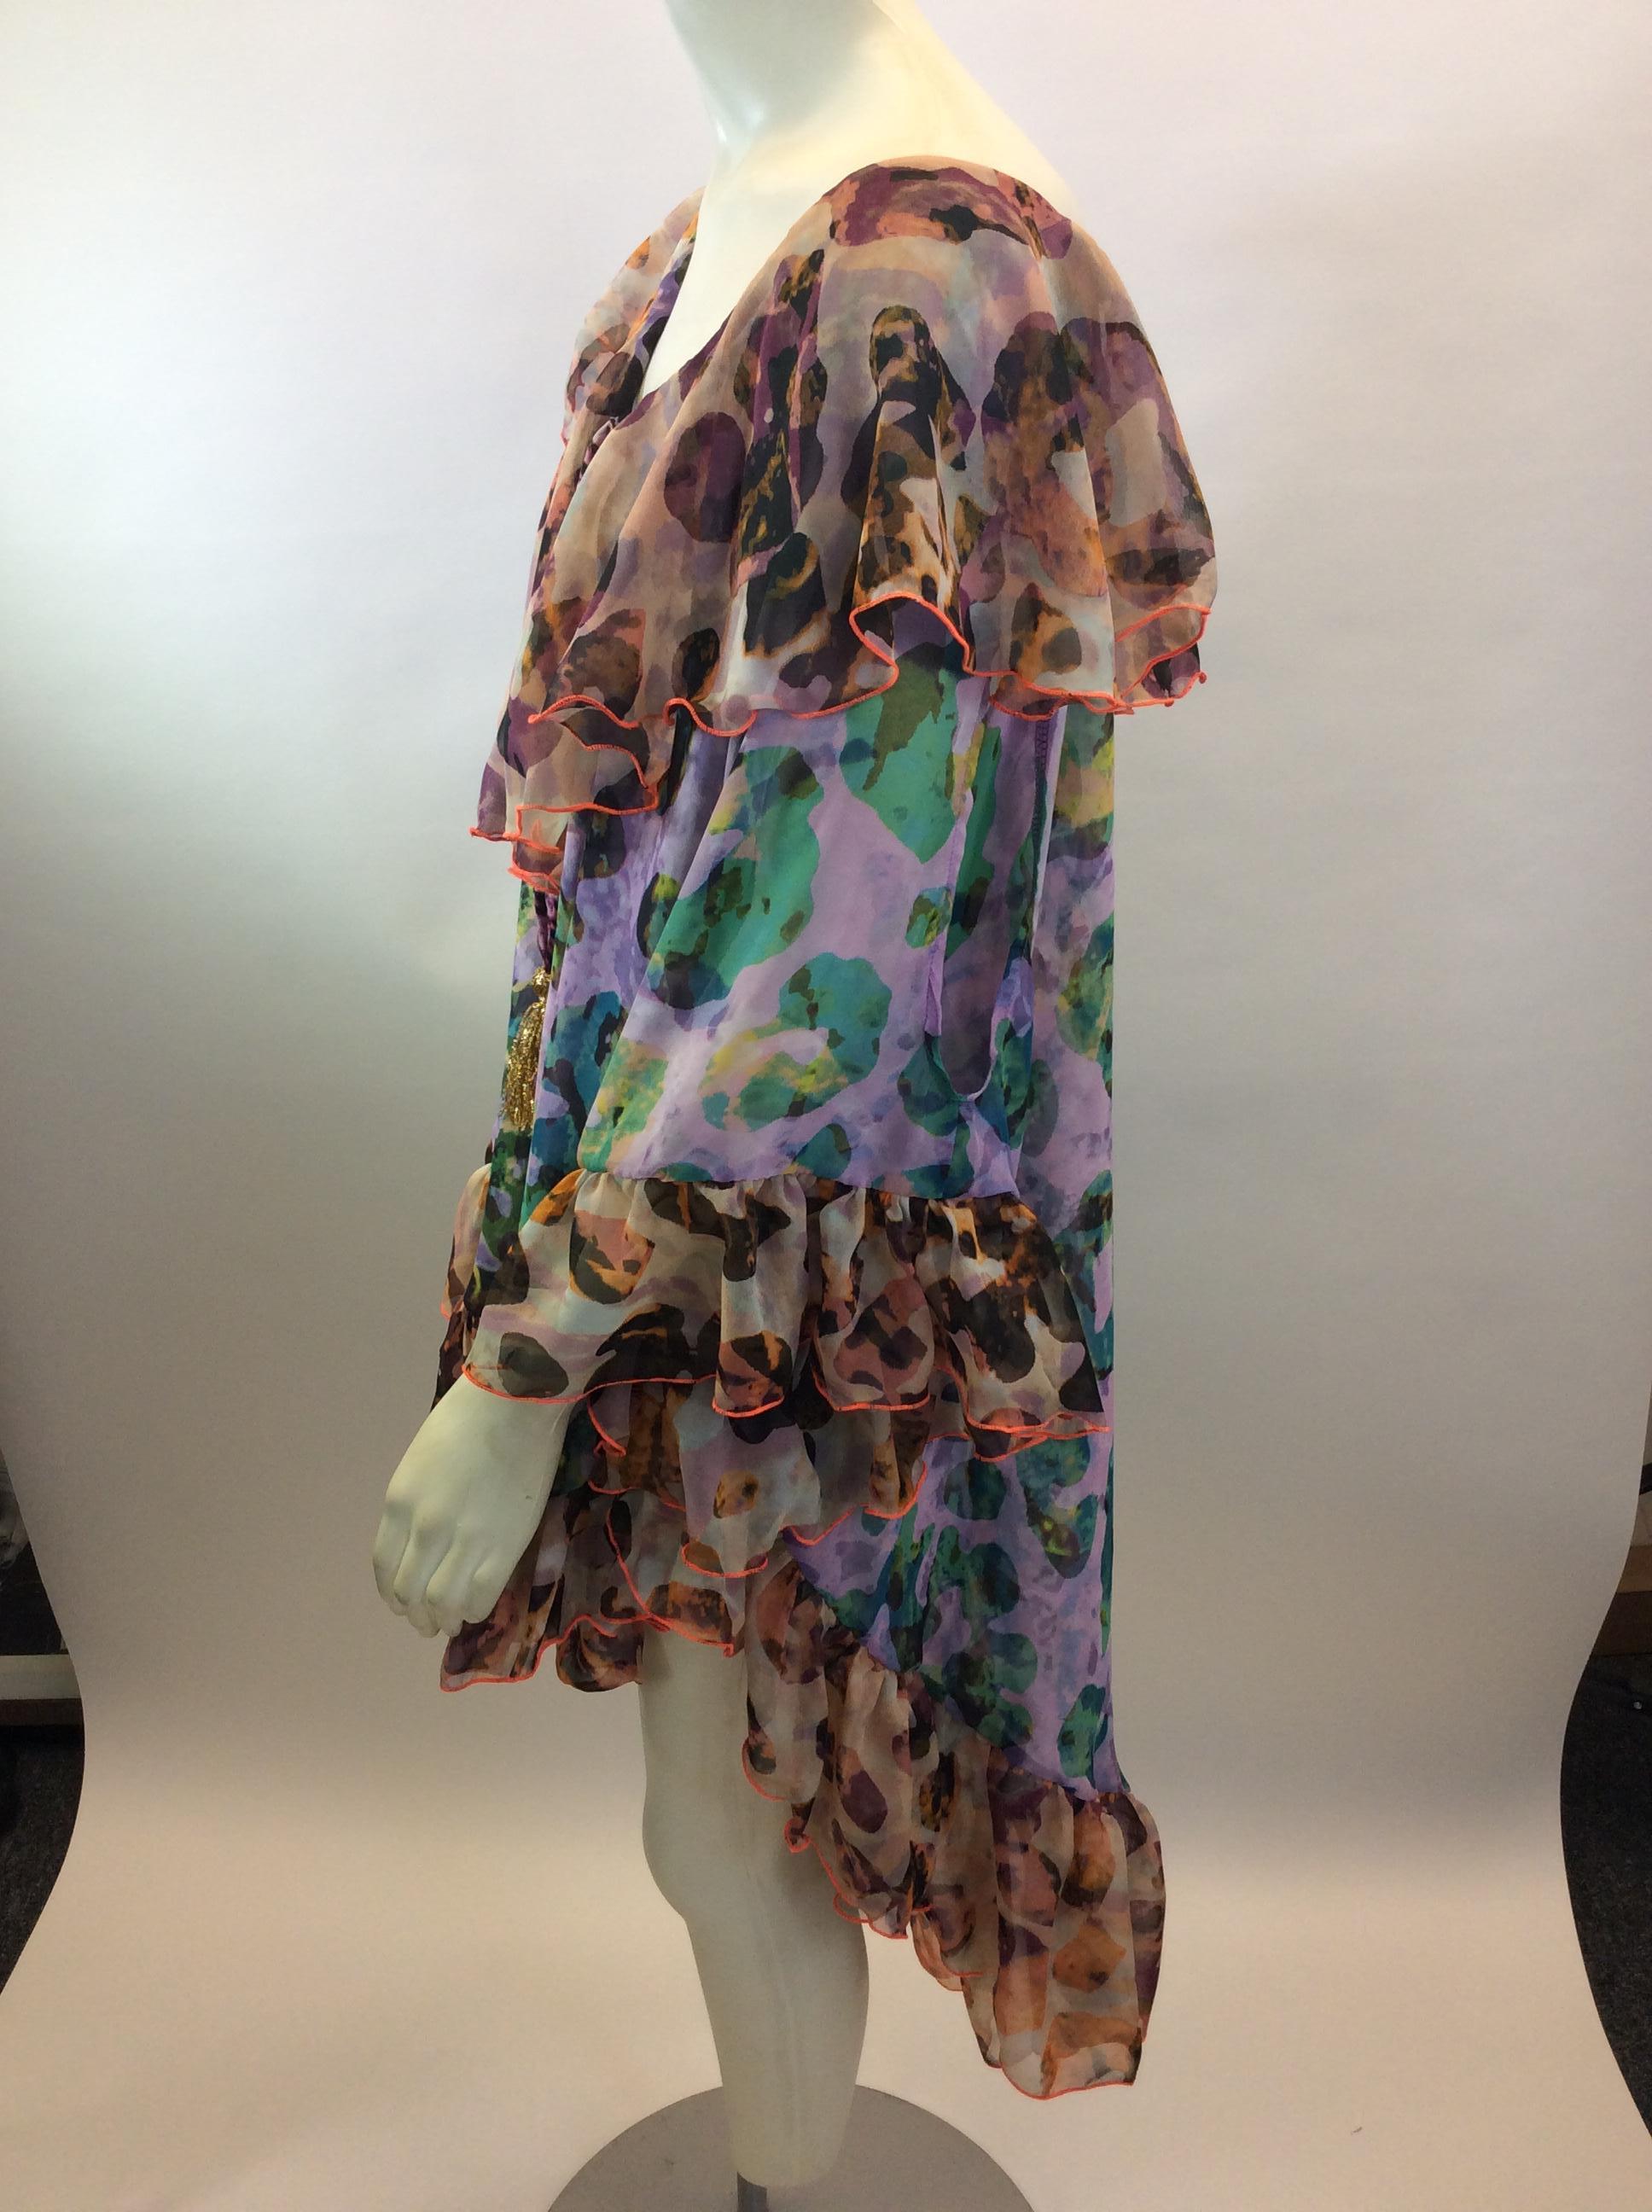 Doll Multi-Color Print Hi-Lo Cover Up 
$150
Made in South Africa
100% Silk
Length 29